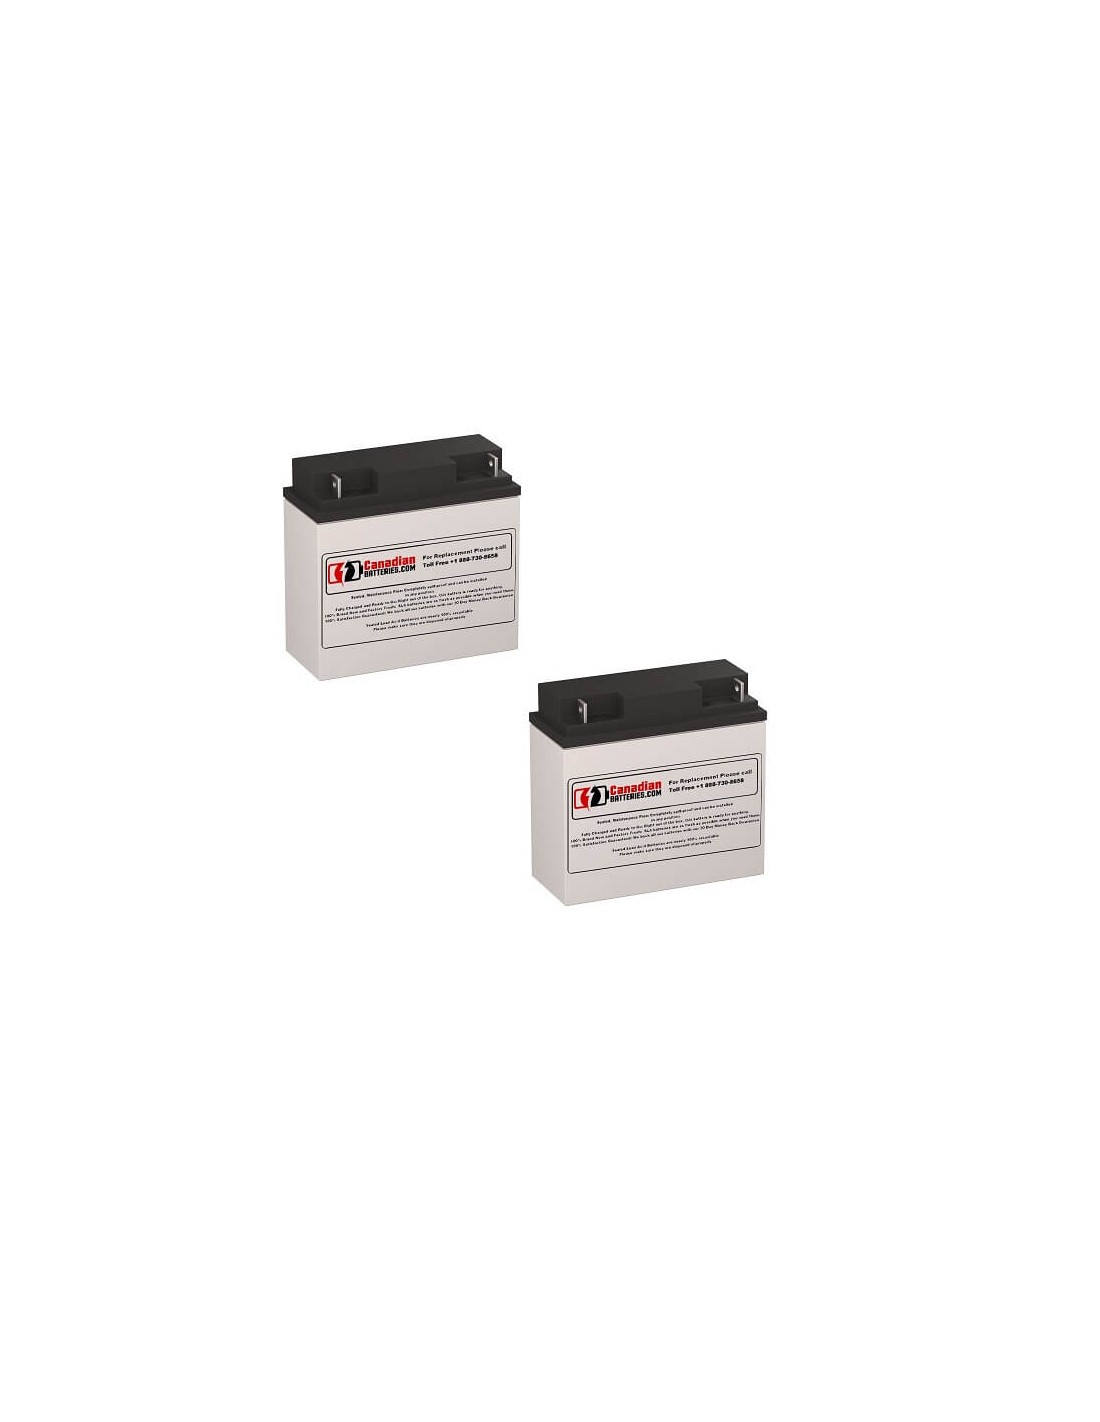 Batteries for Oneac Onmxbc-217 UPS, 2 x 12V, 18Ah - 216Wh